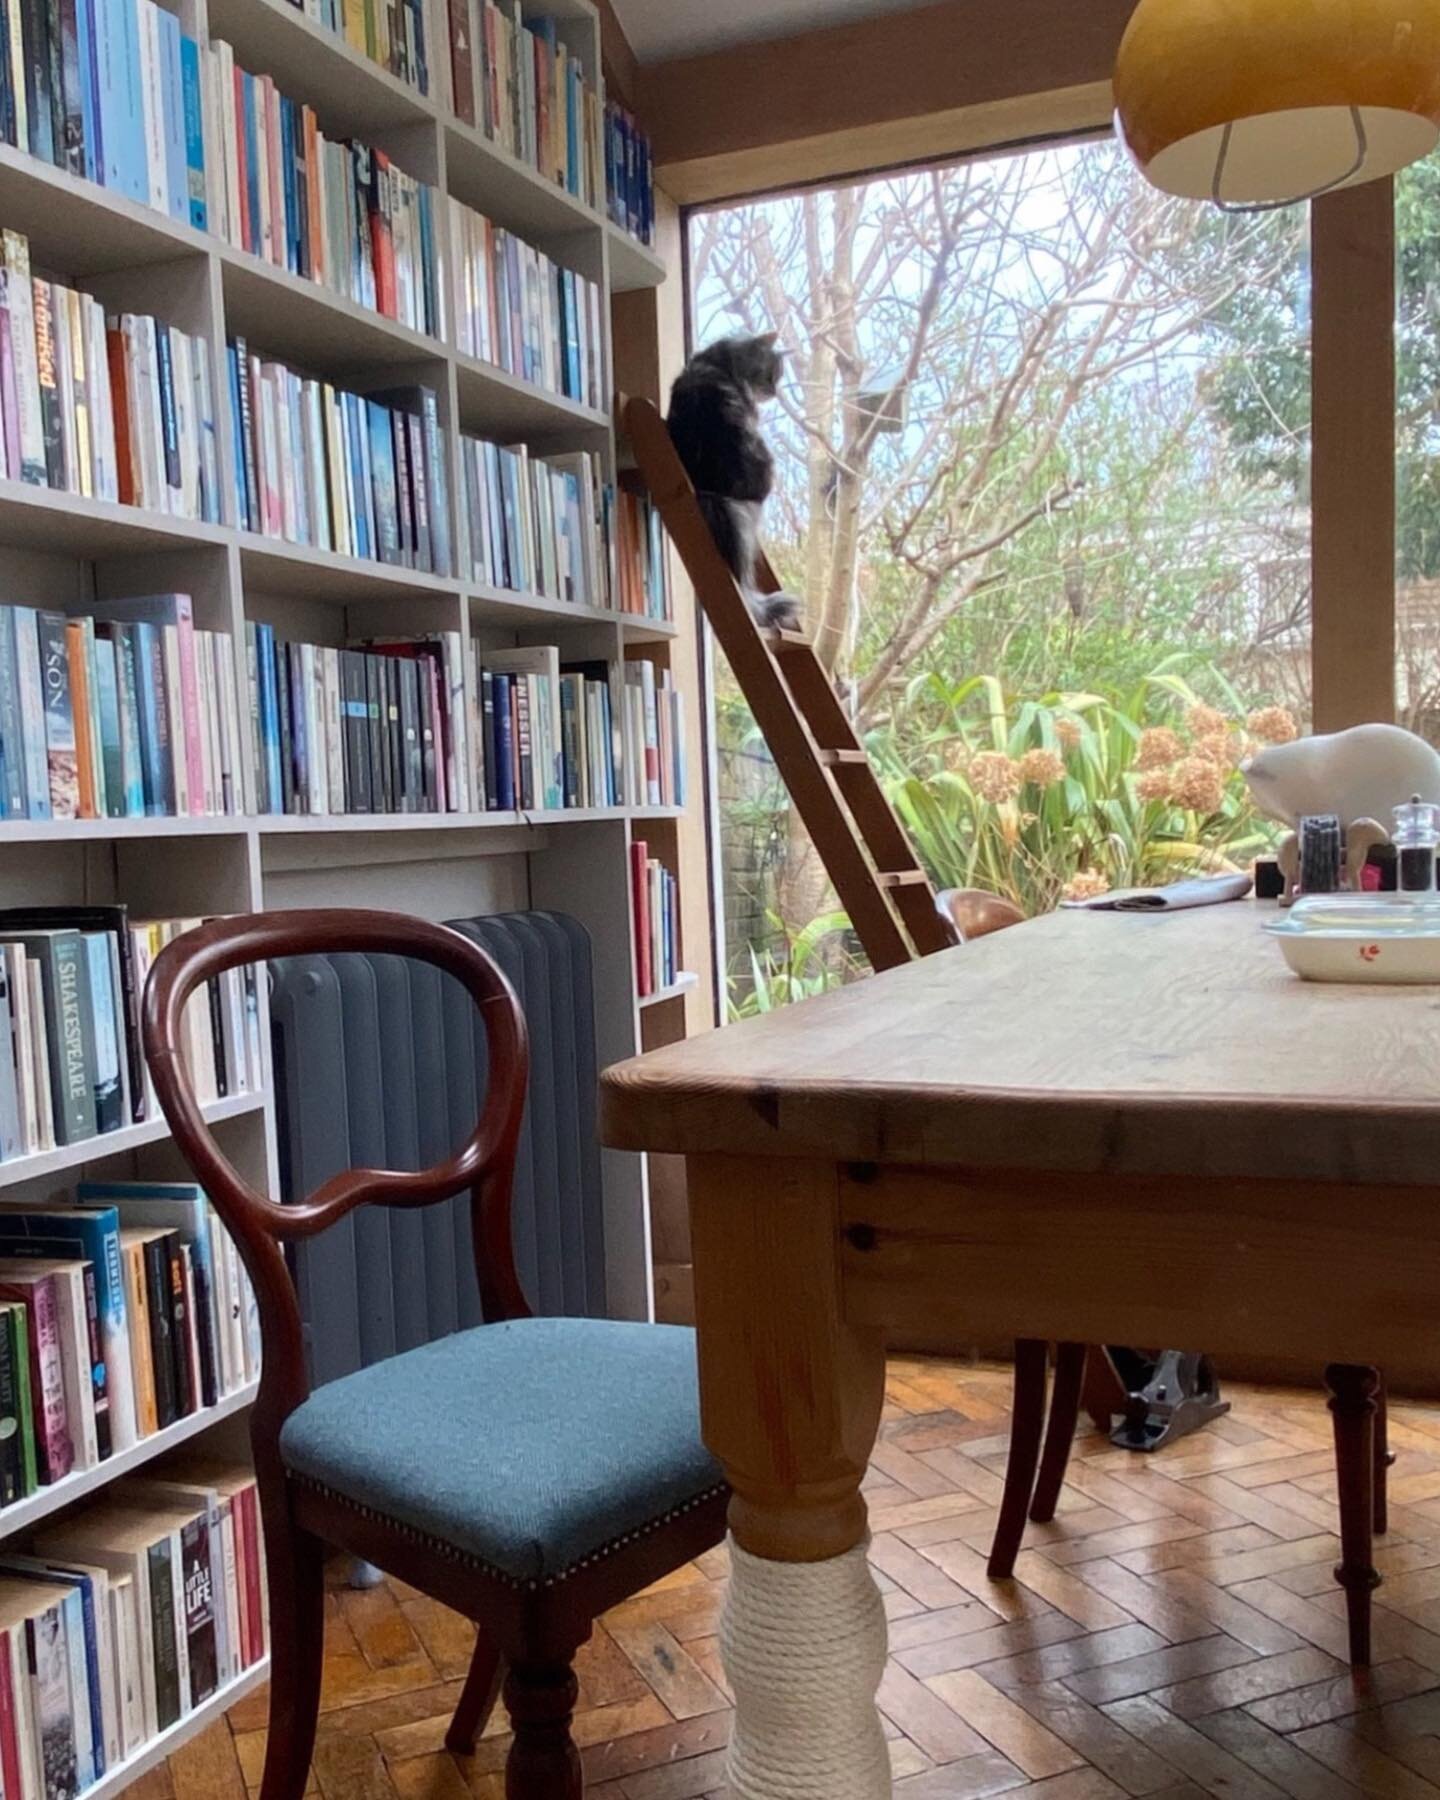 Weekends are for relaxing and watching the birds (and hoping the Easter Bunny has been).
The cat likes to nap on one of the bookshelves, though annoyingly in the letter G 🙀📚
.
.
.
.
.
.
 #bookcollector #homelibrary #fortheloveofbooks #bookshelfie #